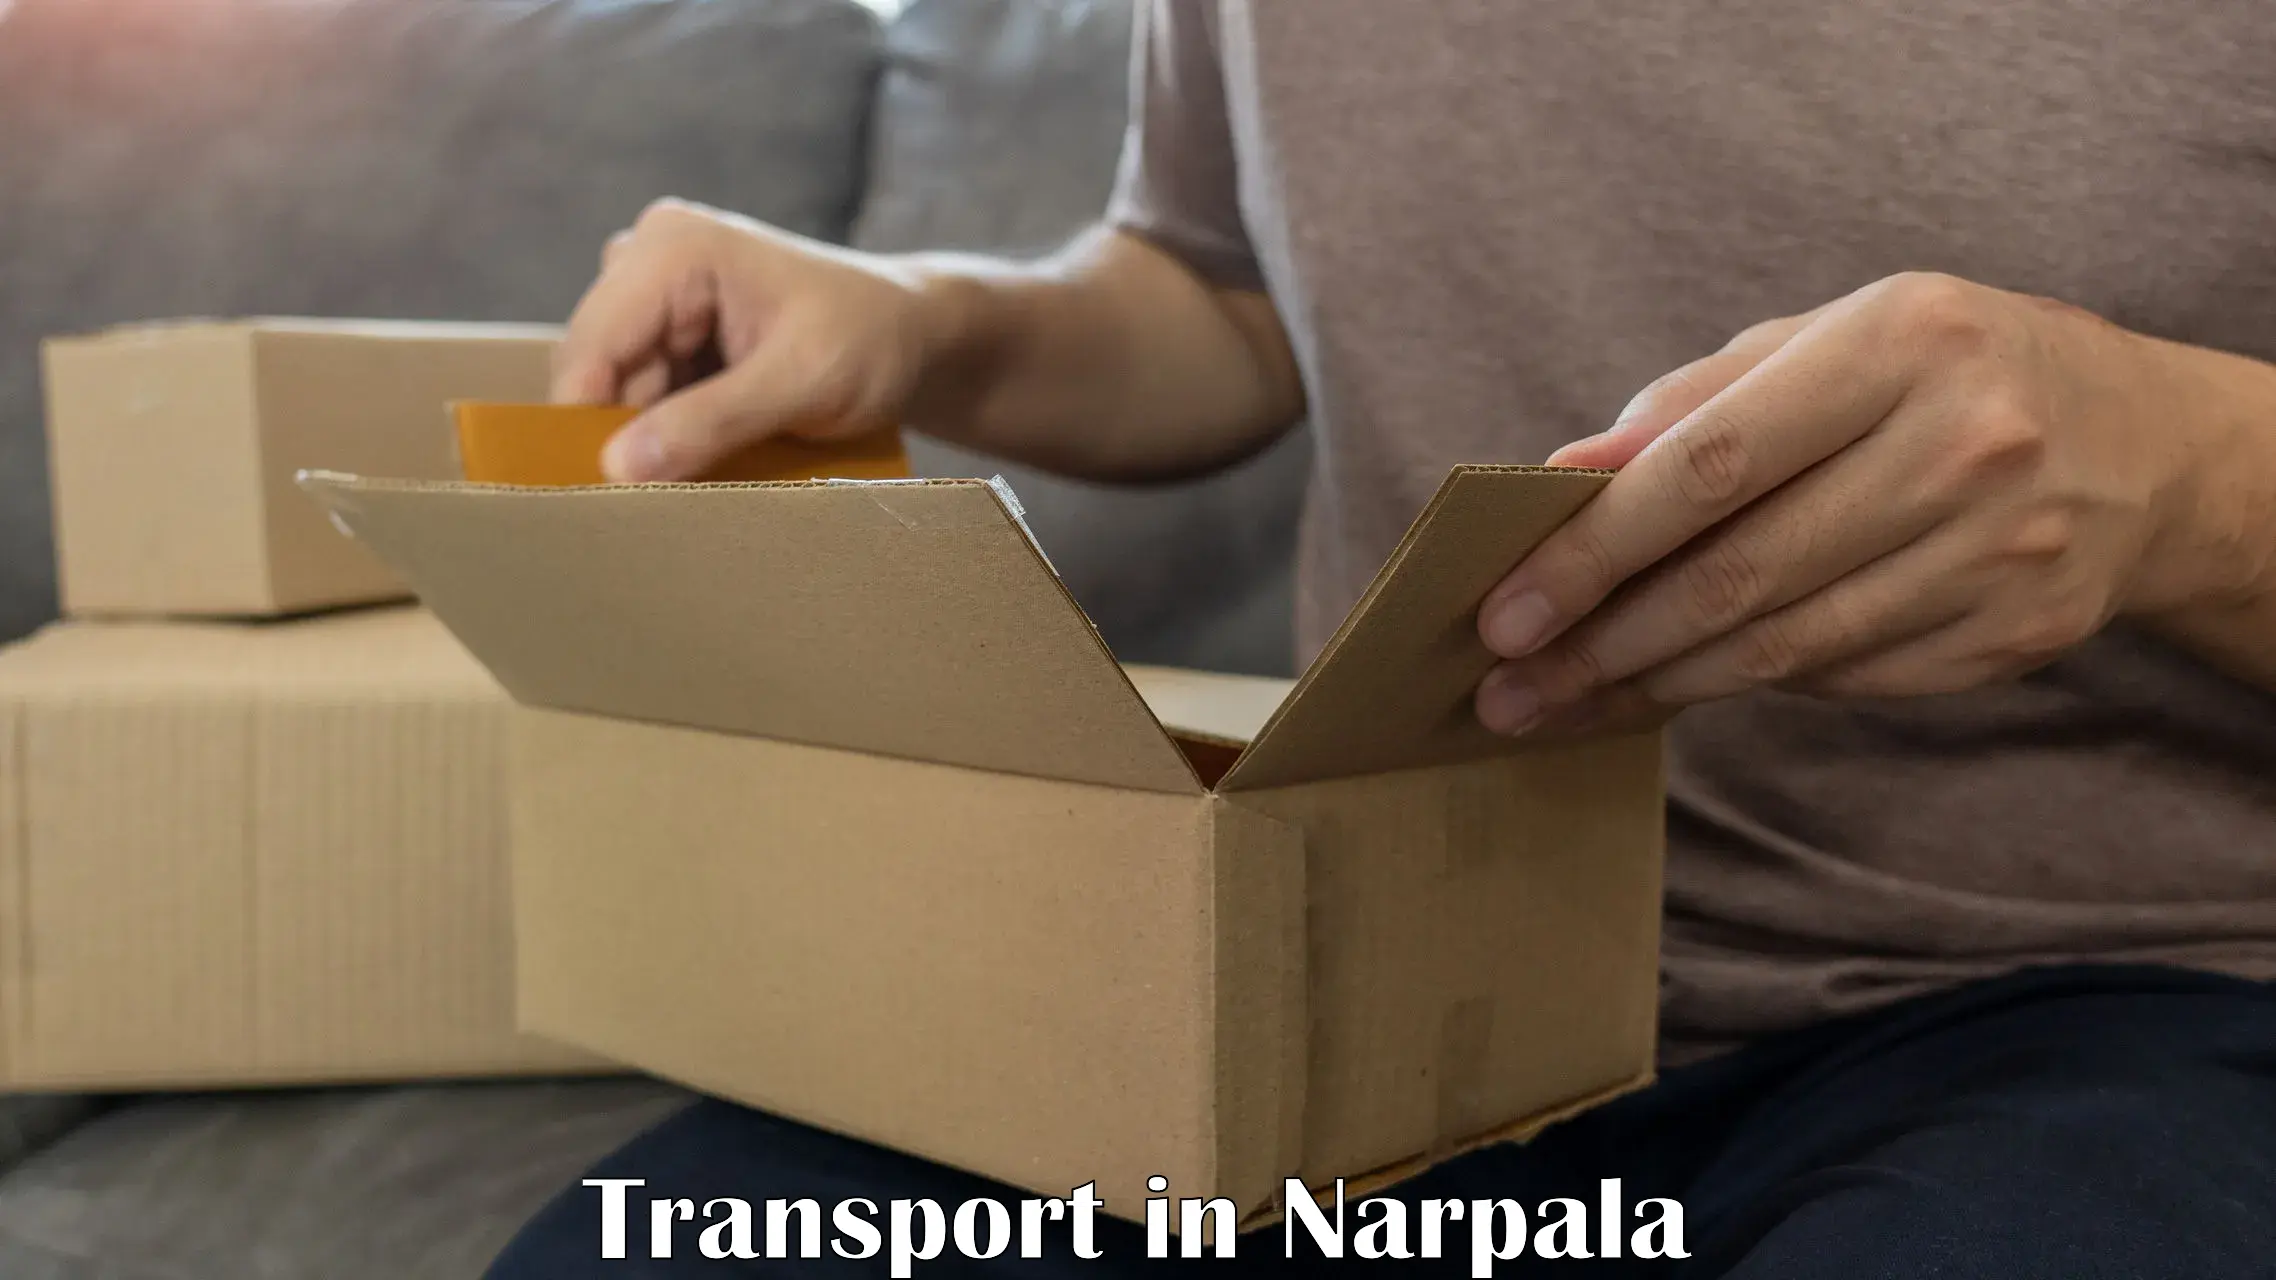 Daily transport service in Narpala